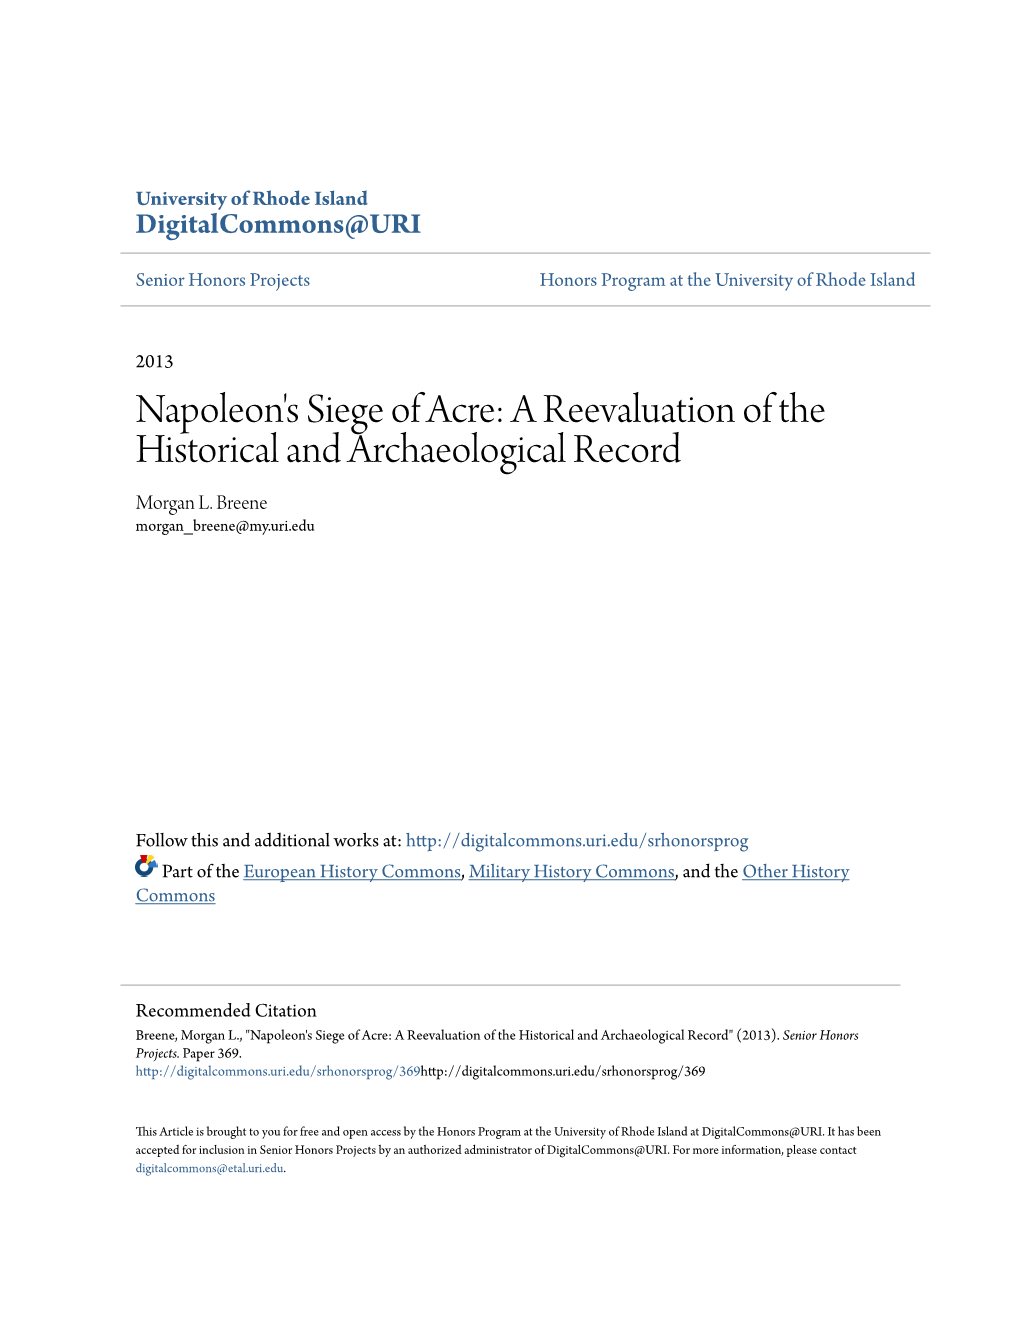 Napoleon's Siege of Acre: a Reevaluation of the Historical and Archaeological Record Morgan L